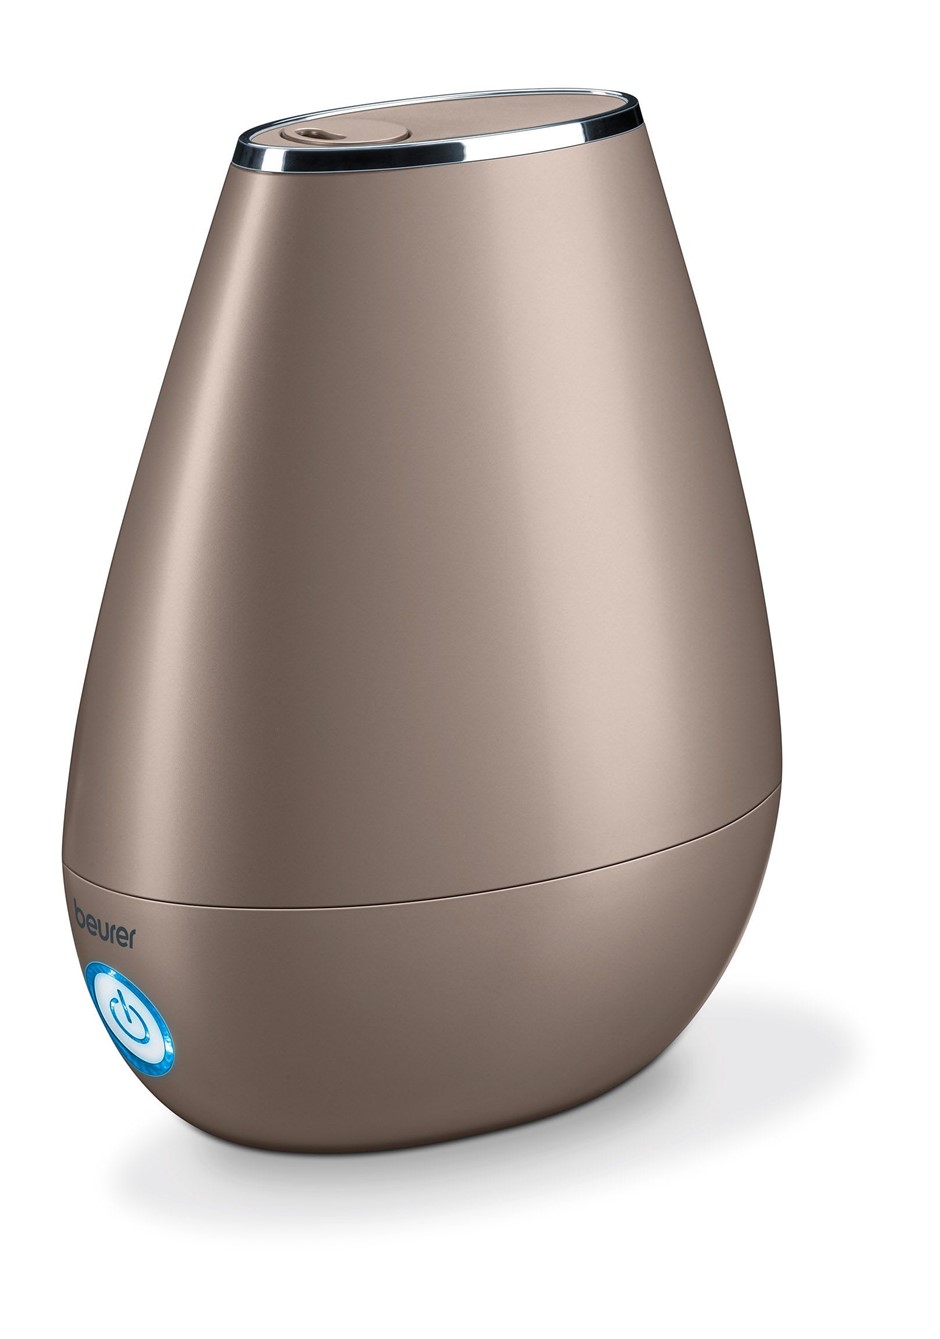 LB 37 humidificateur toffee - 1 pc